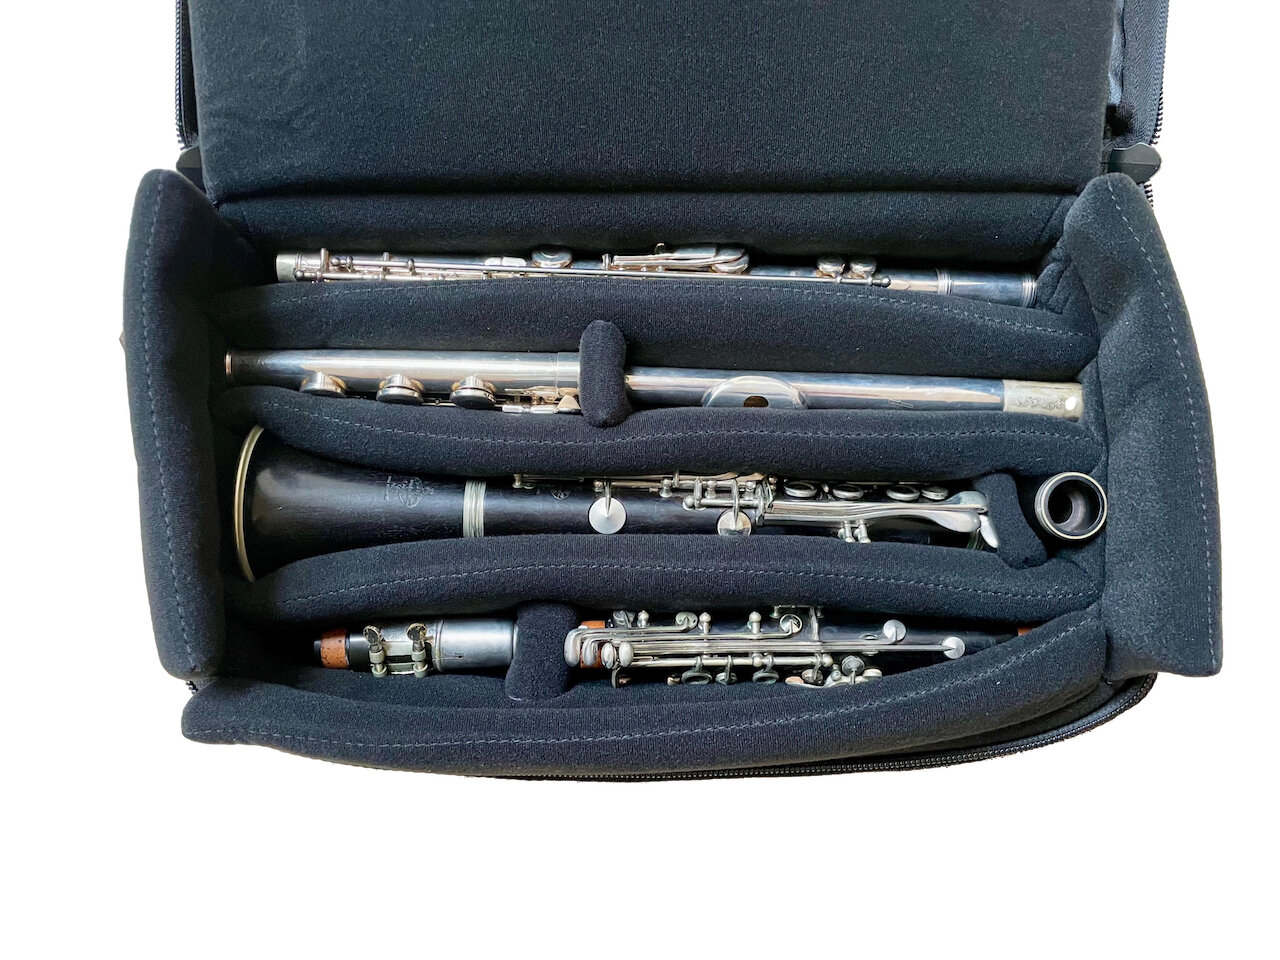 Clarinet case for sale-Double Case (shoulder) for Flute and 